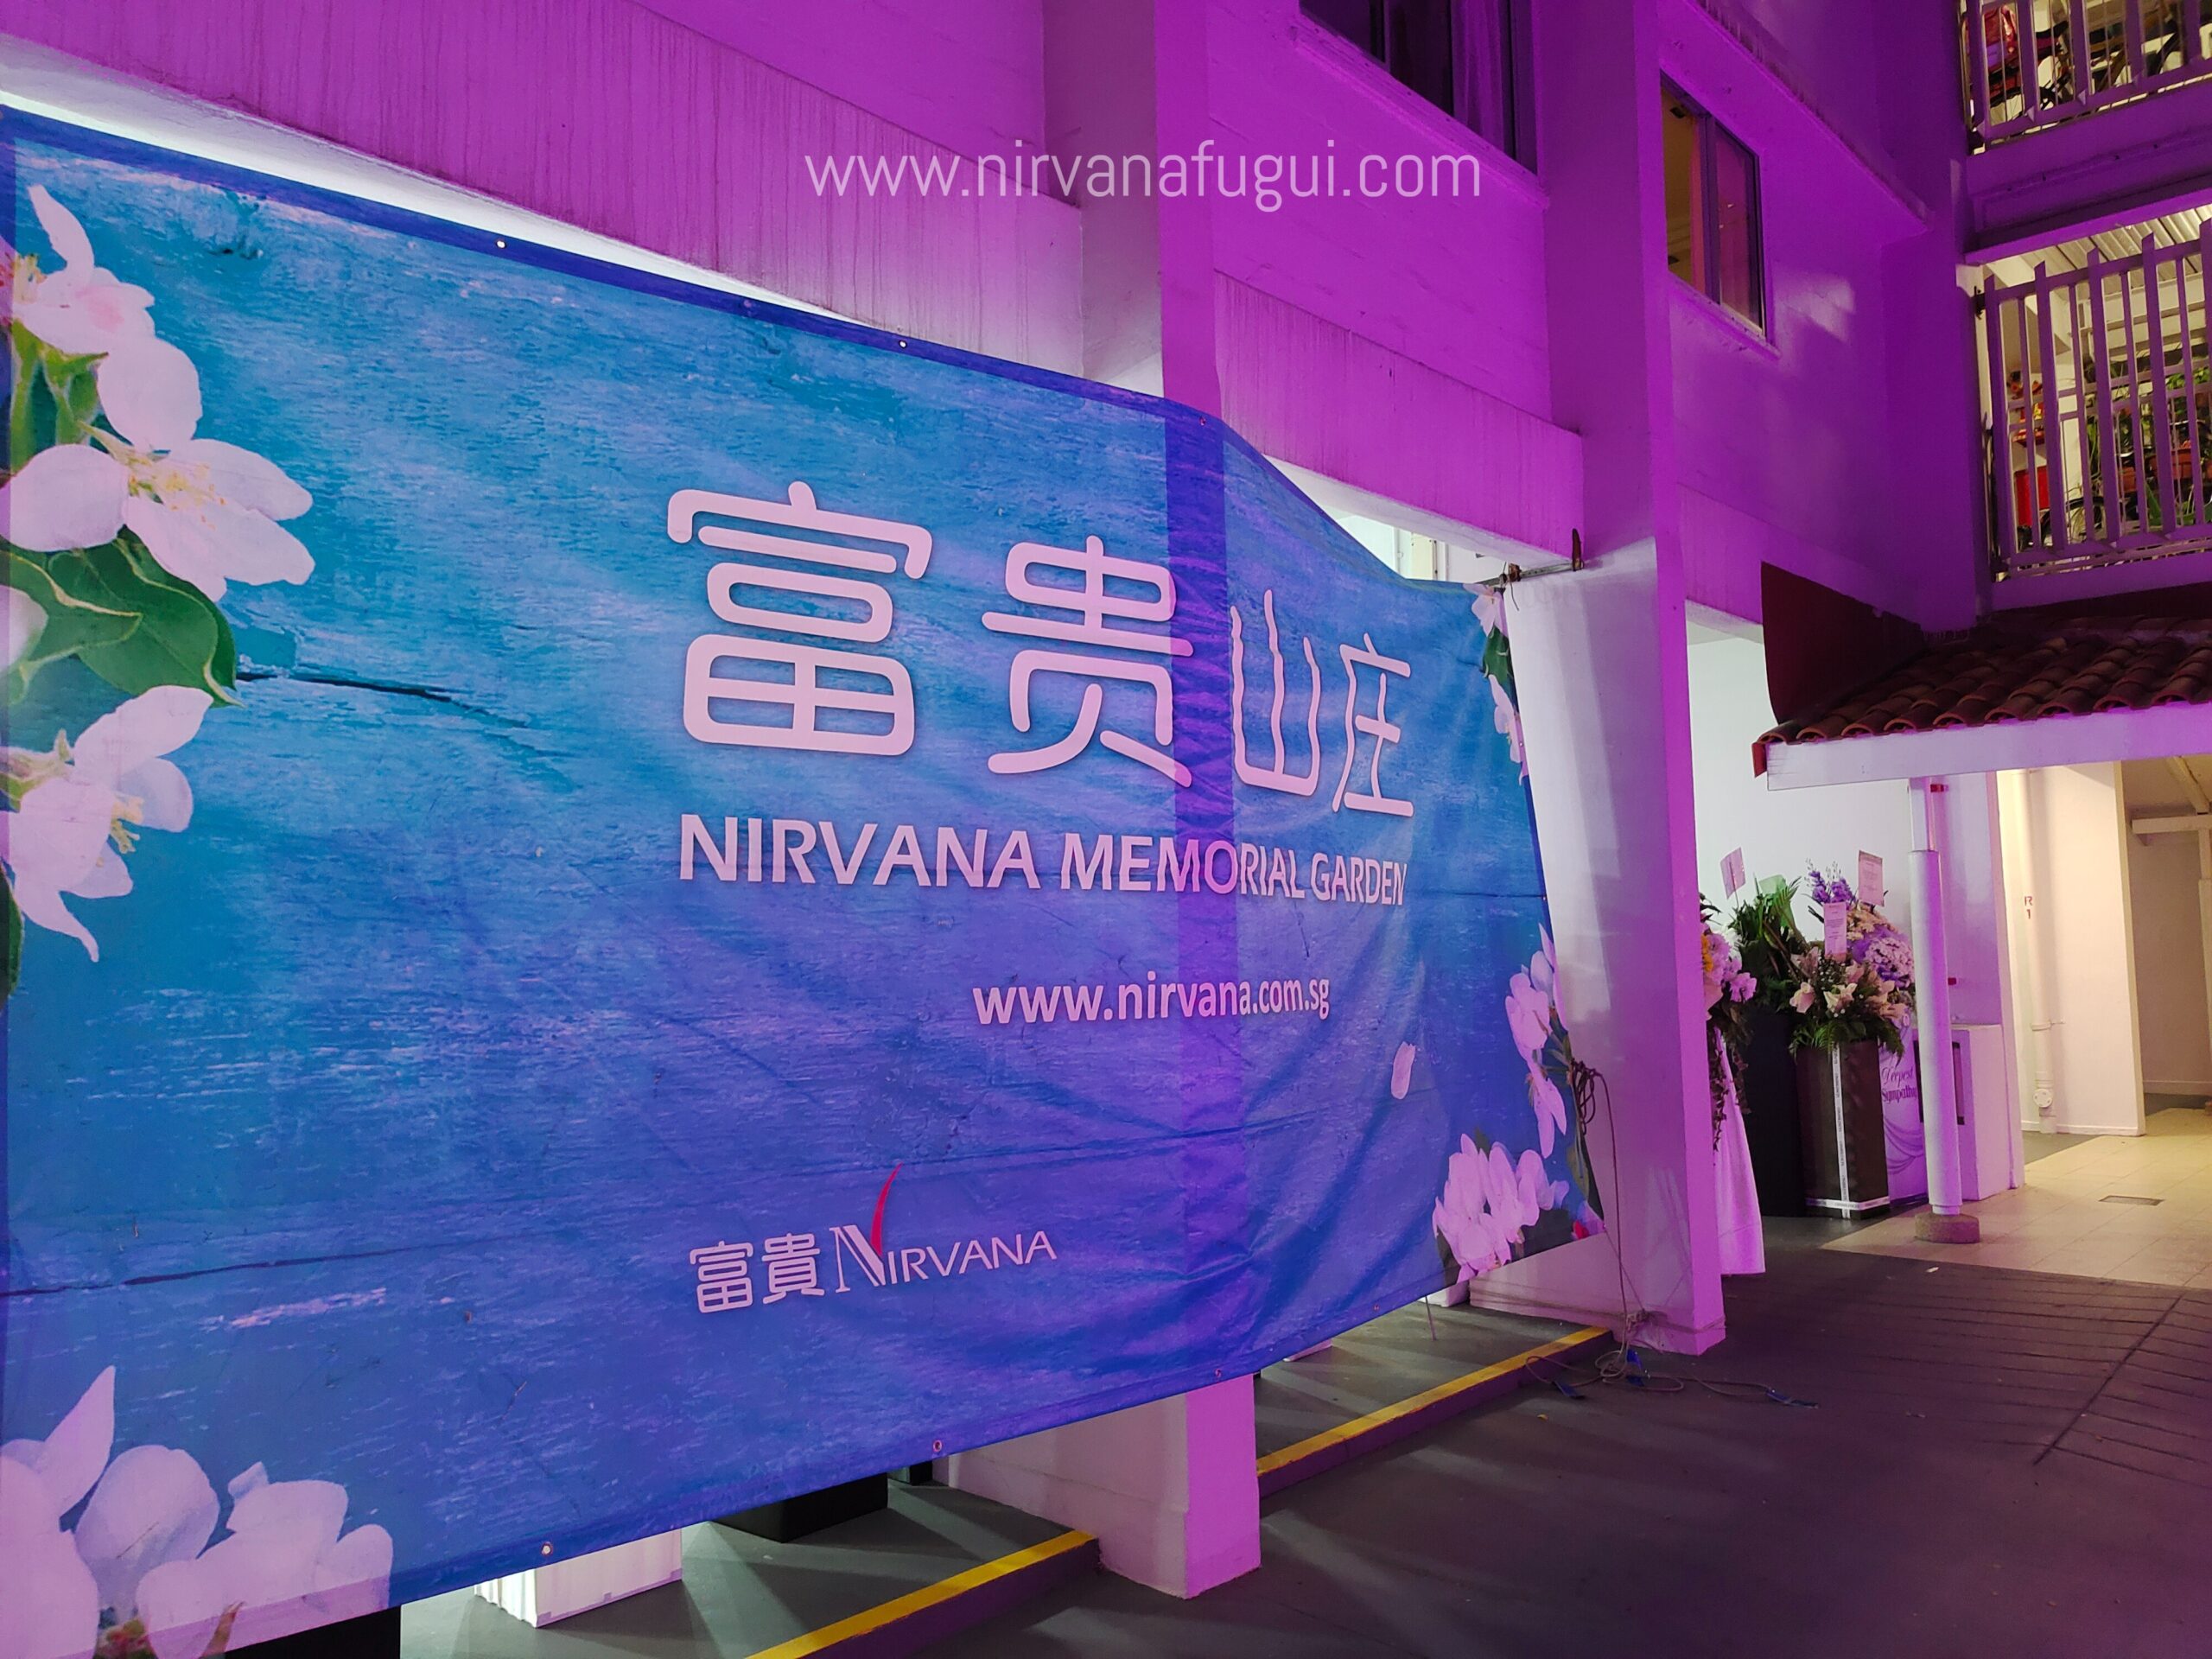 At Nirvana Singapore, we also organise Buddhist funeral services at HDB void decks